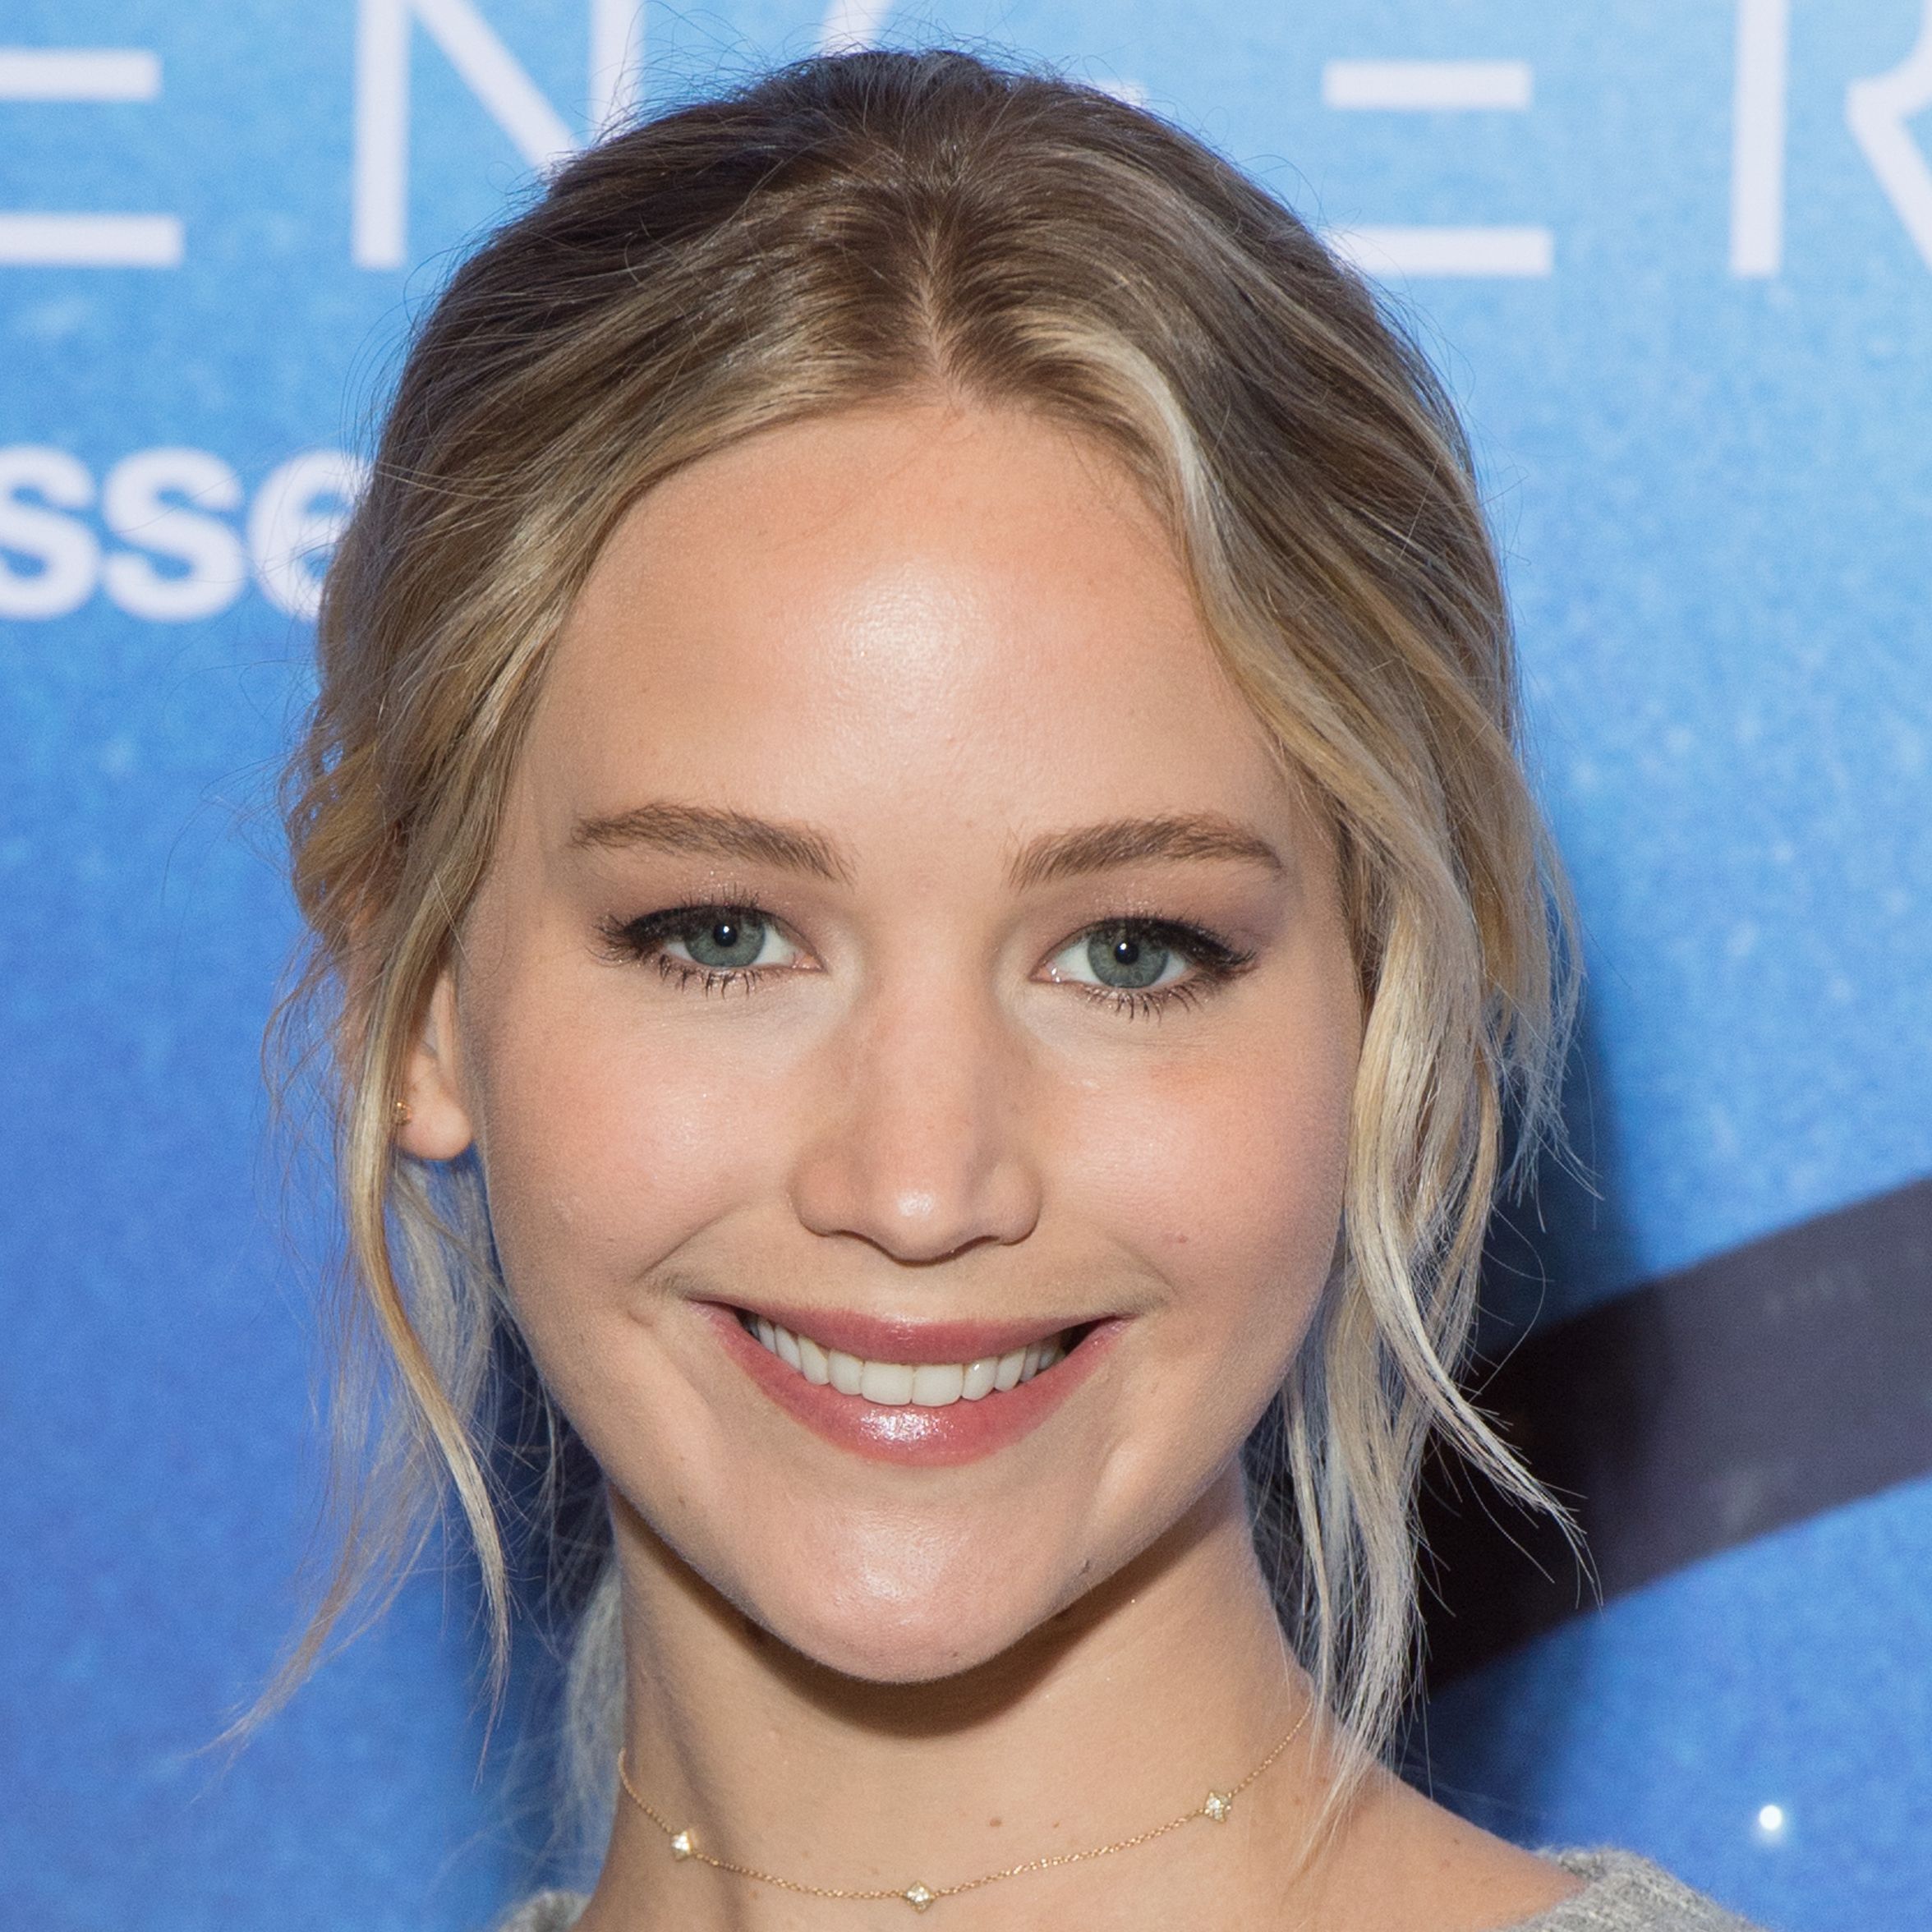 Jennifer Lawrence with eyelash extensions for hooded eyes